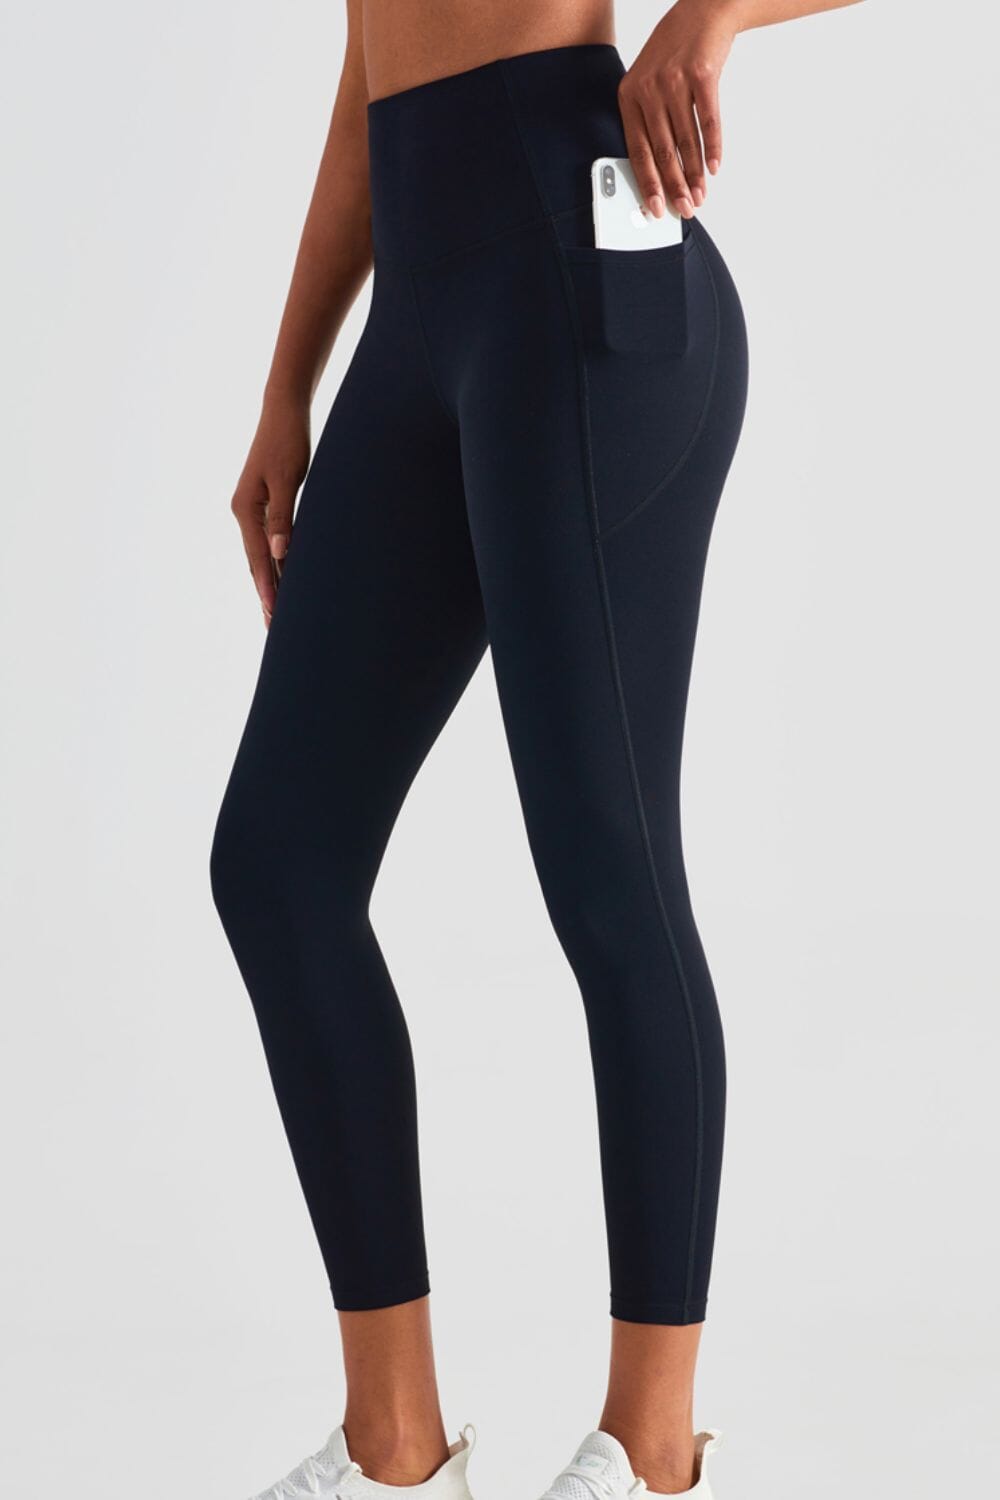 Wide Waistband Sports Leggings with Pockets Black / 4